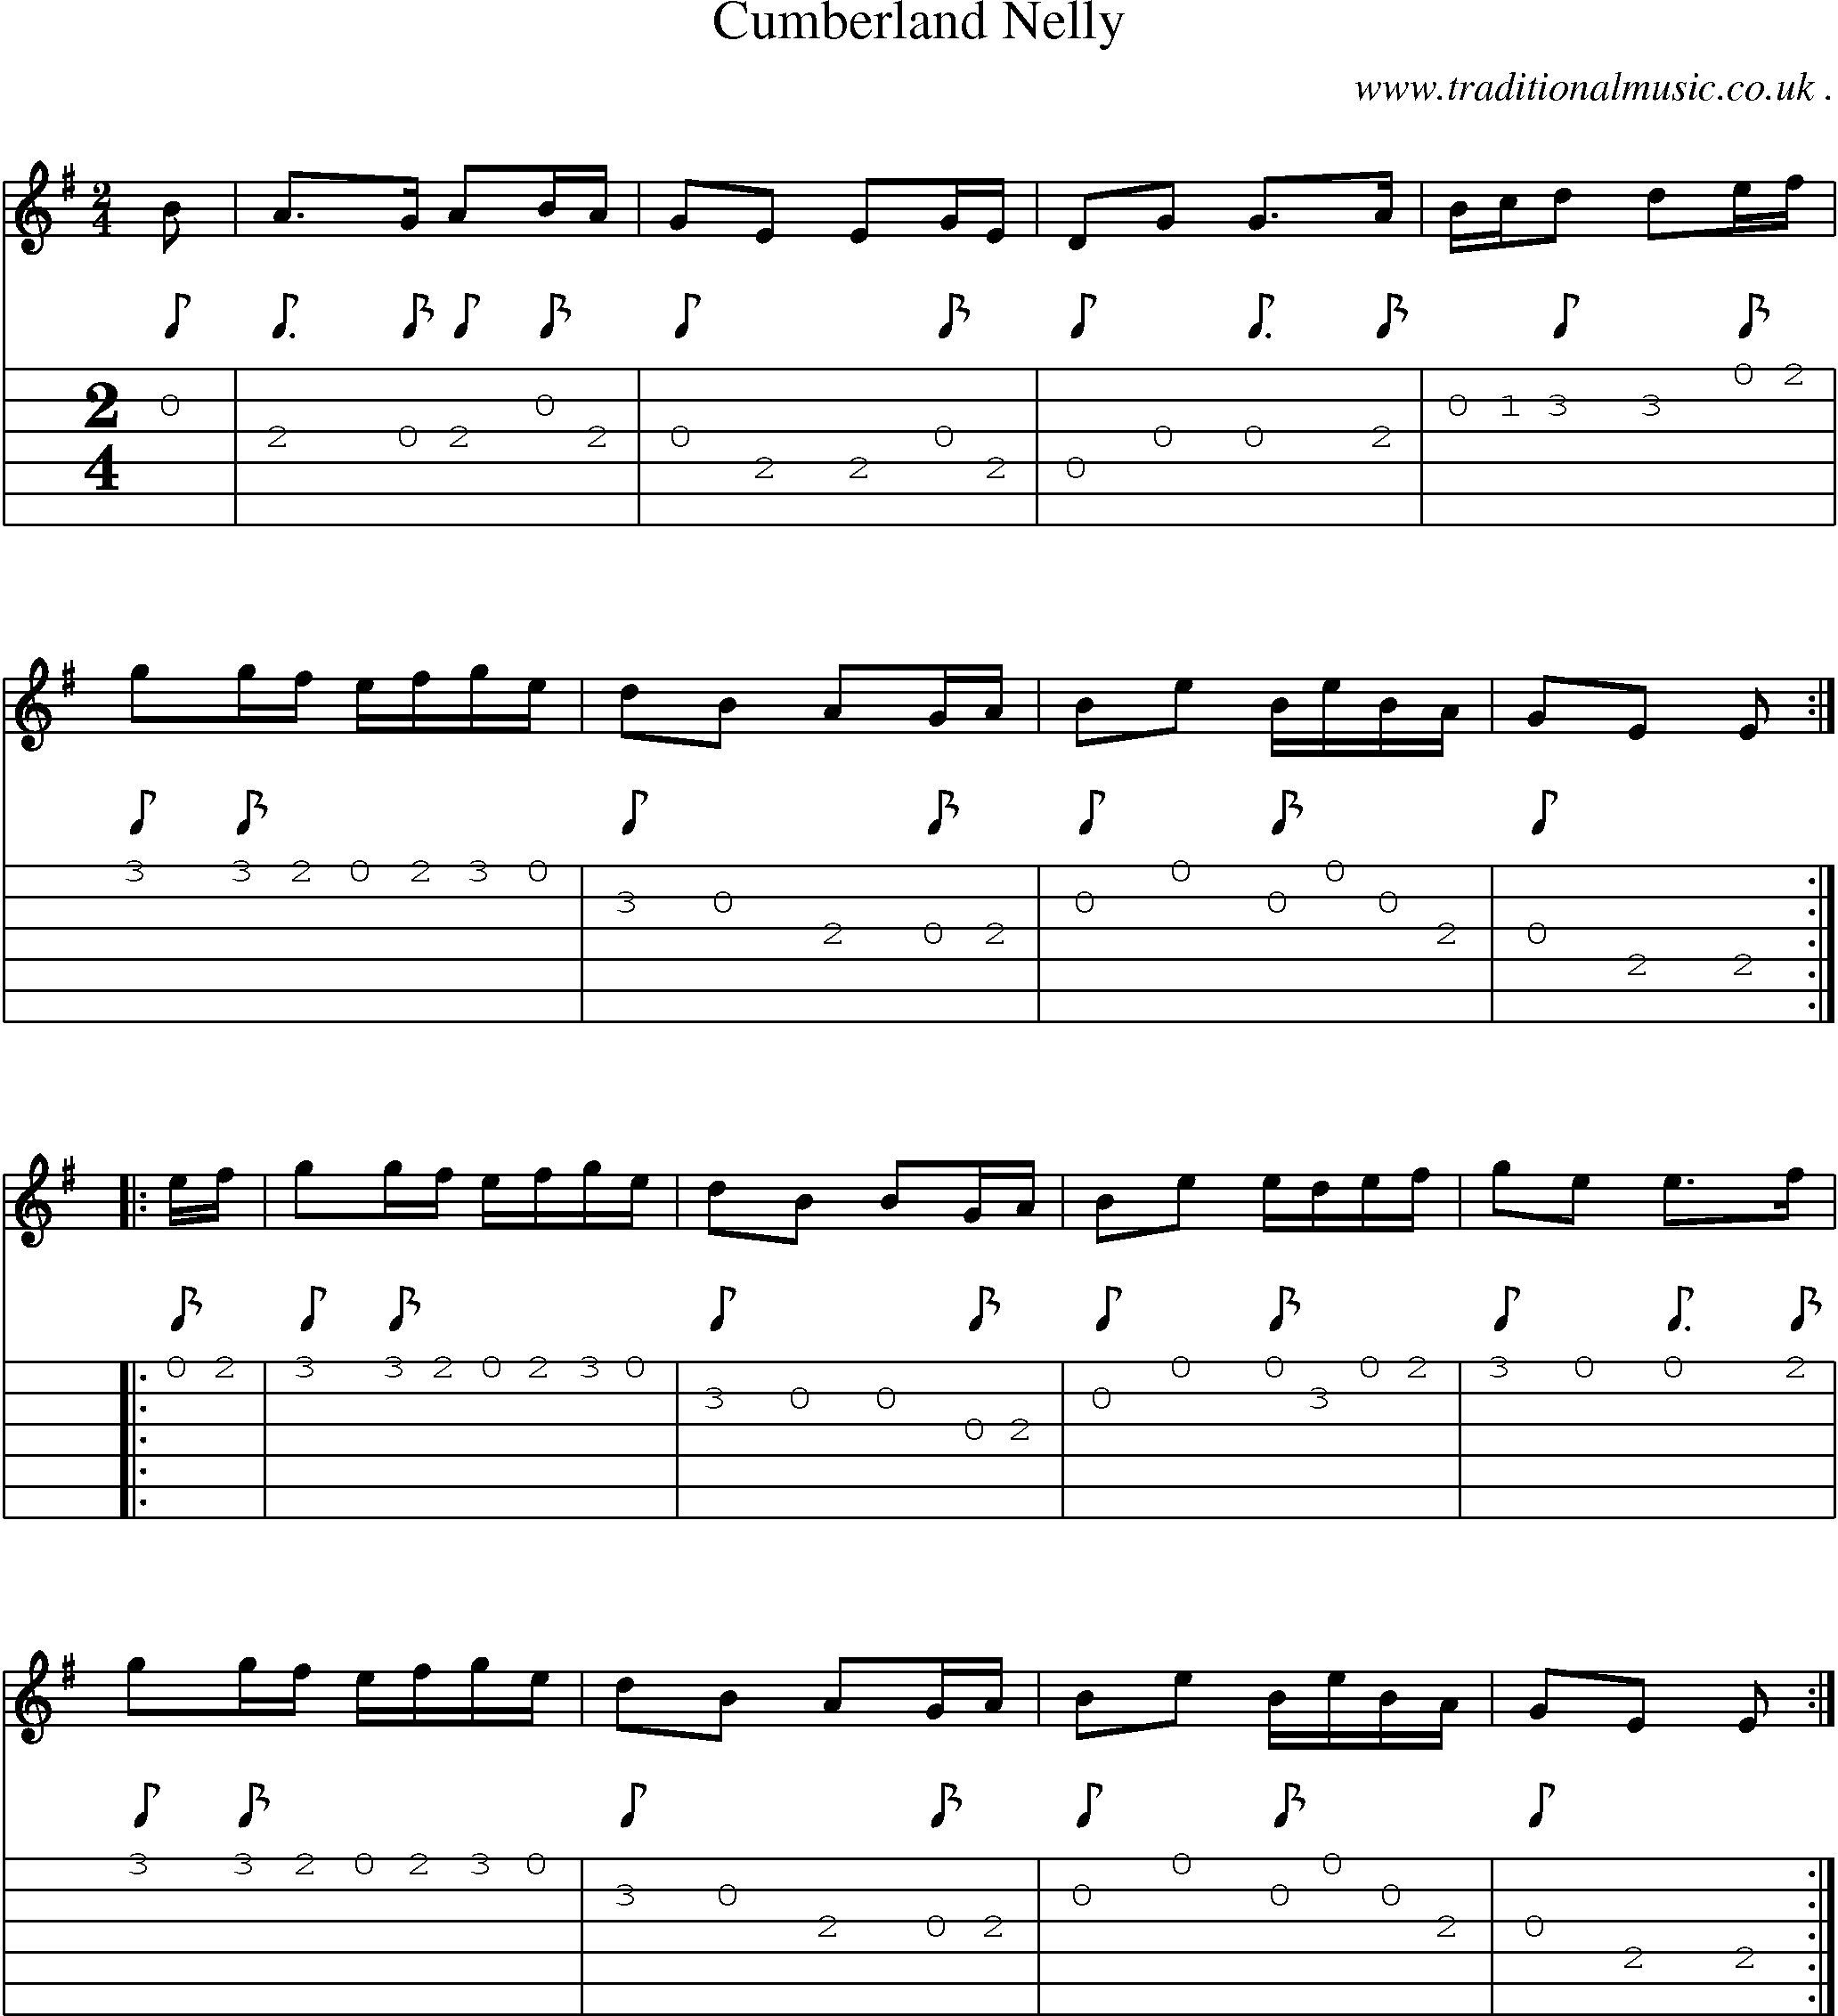 Sheet-Music and Guitar Tabs for Cumberland Nelly